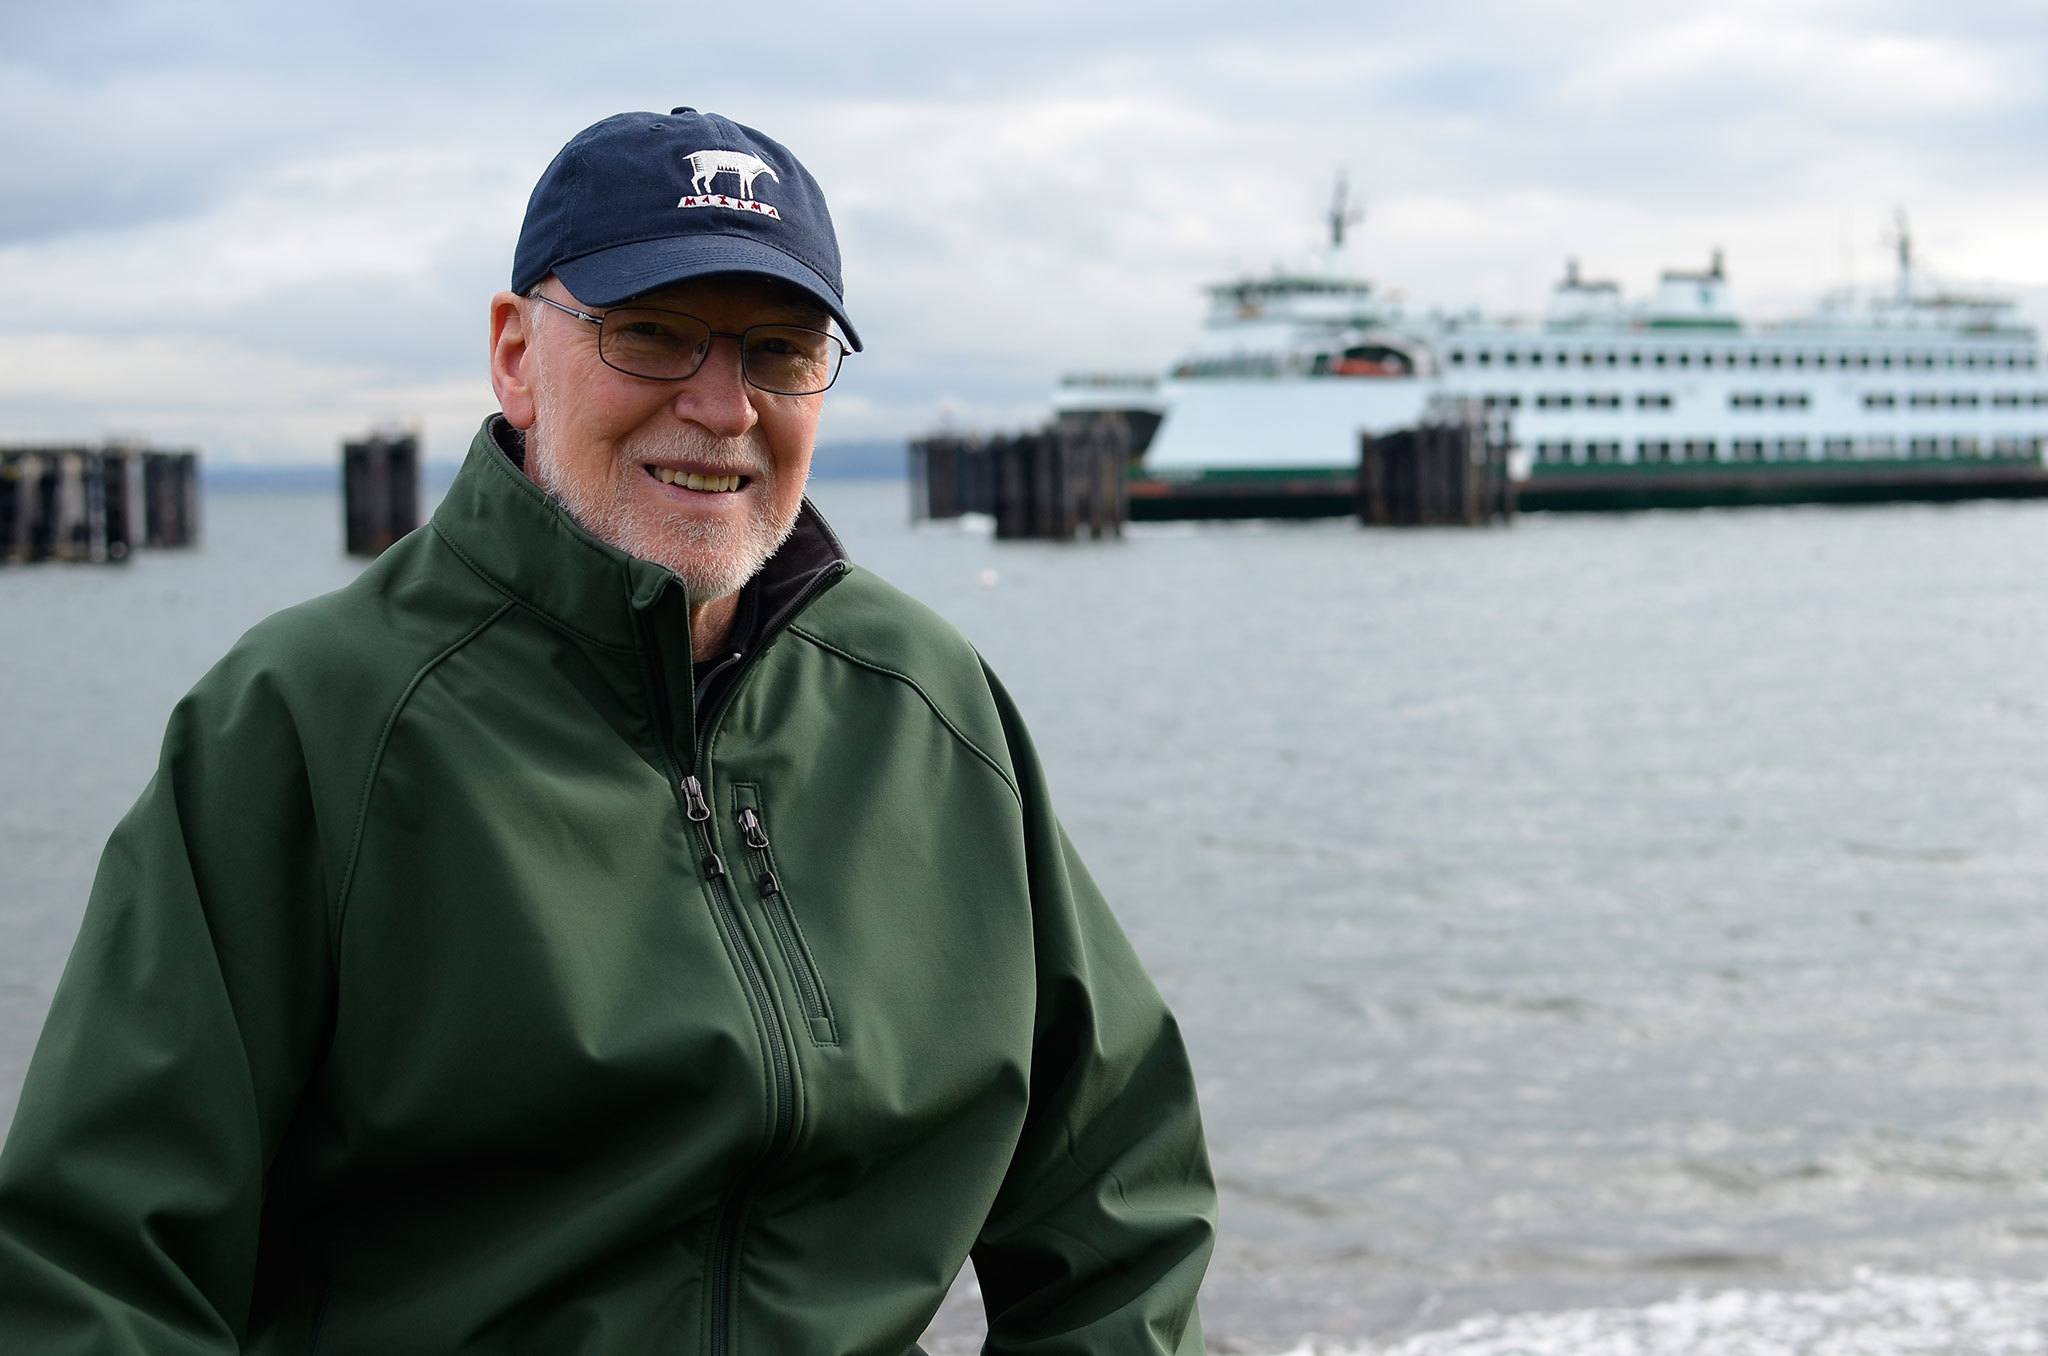 Jack Lynch is this month’s hometown hero. He’s been a leader in the Clinton community for years, most recently working on improving ferry service to the South End.